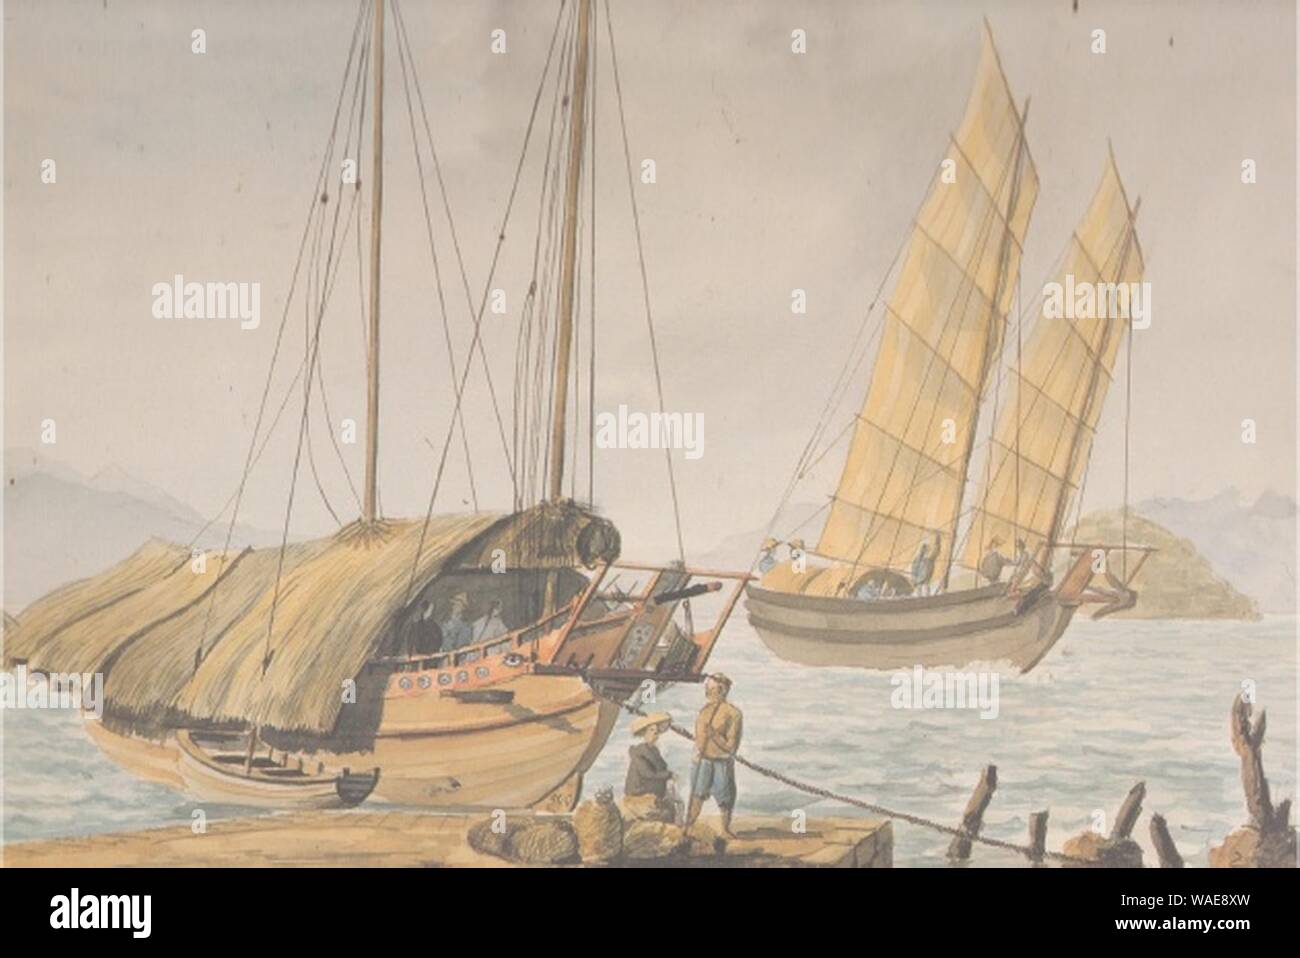 Drawing 01 Macau Guard Ship seen from the front 1832 4-327452dbc3. Stock Photo